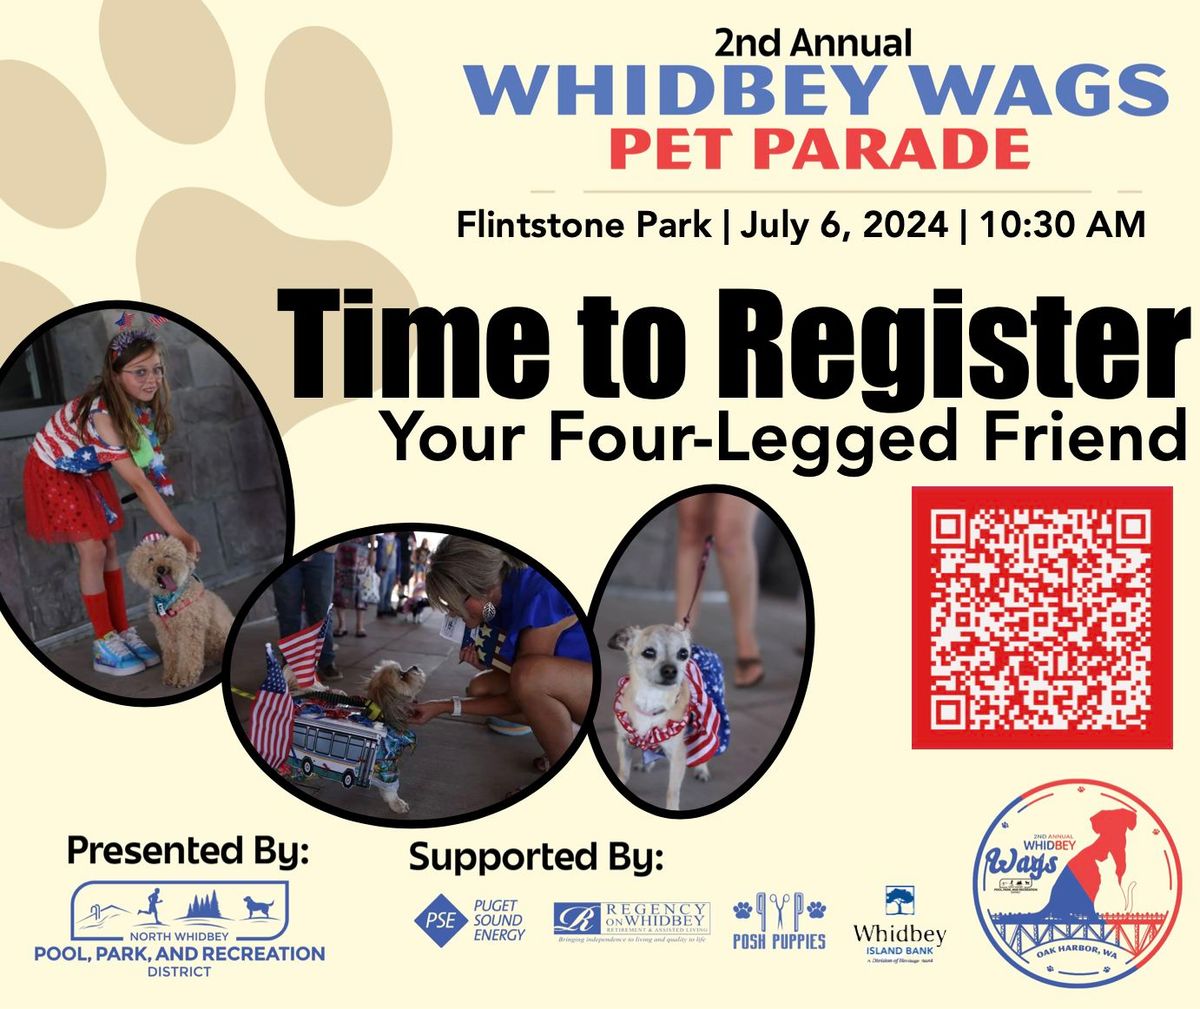 2nd Annual Whidbey Wags Pet Parade